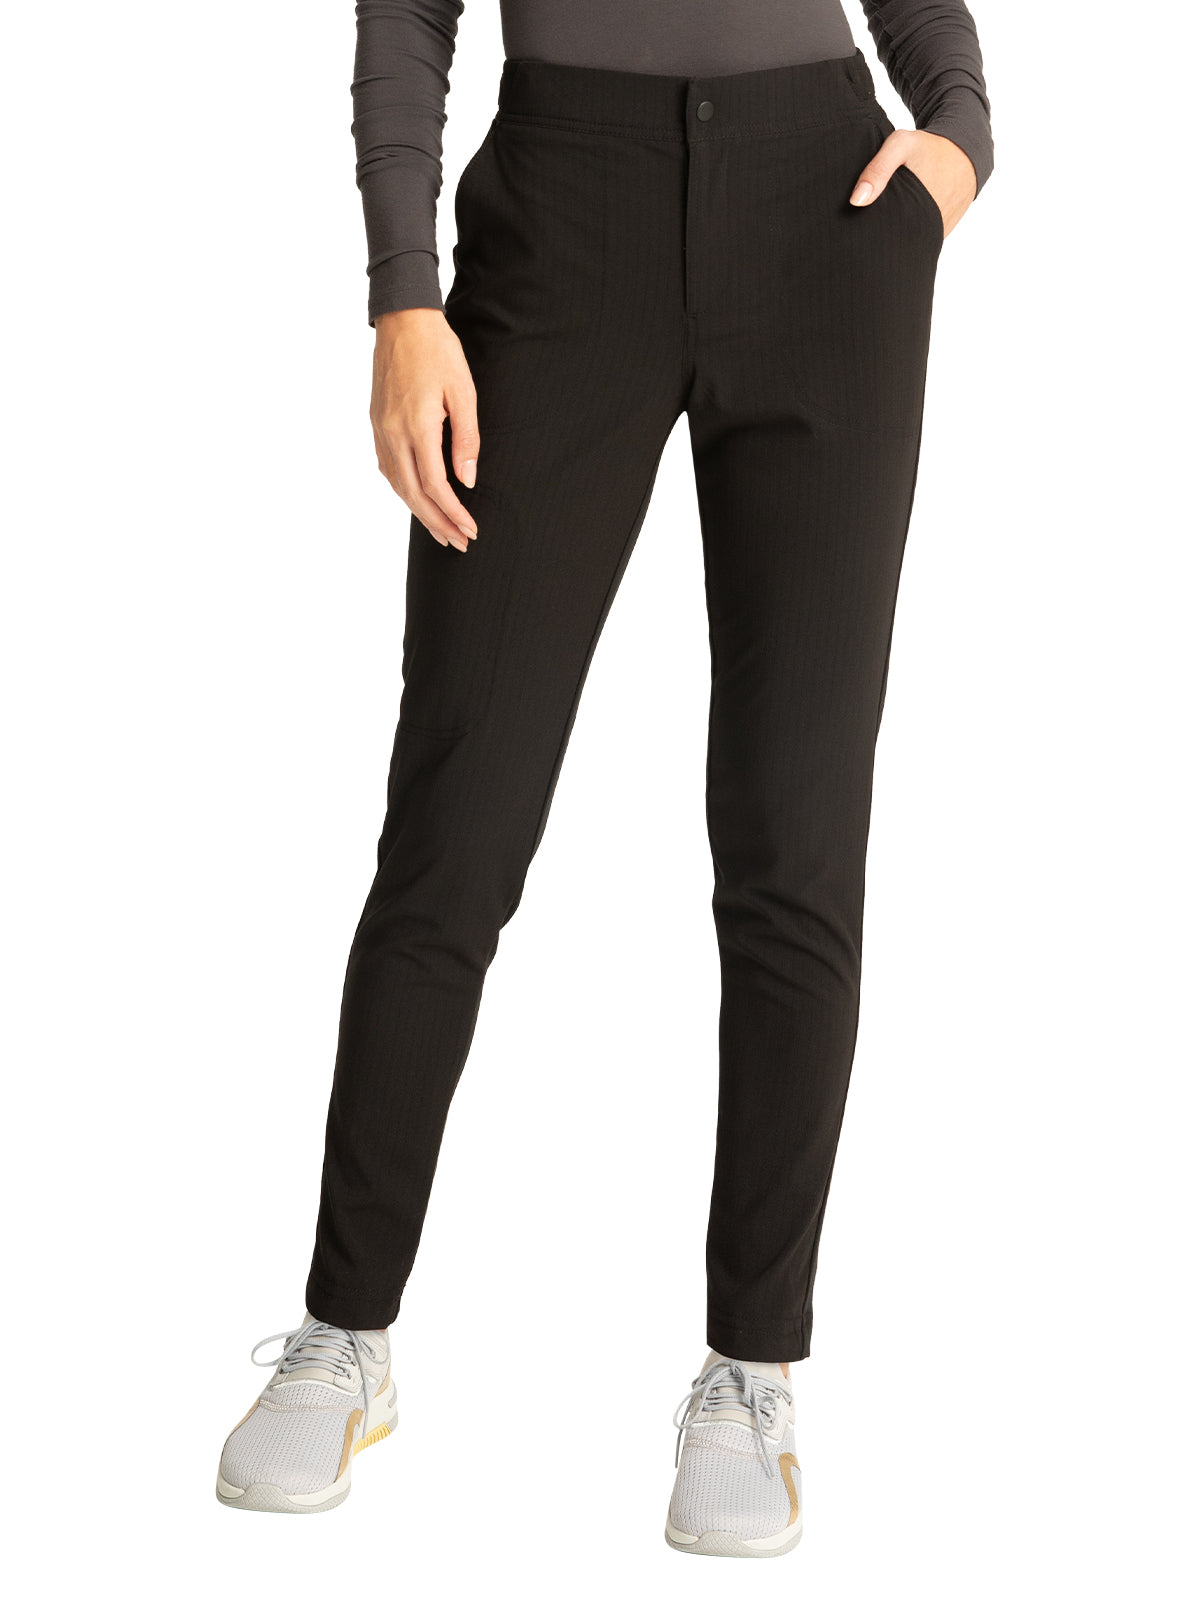 Women's Zip Fly Front Tapered Leg Pant - CK270 - Black